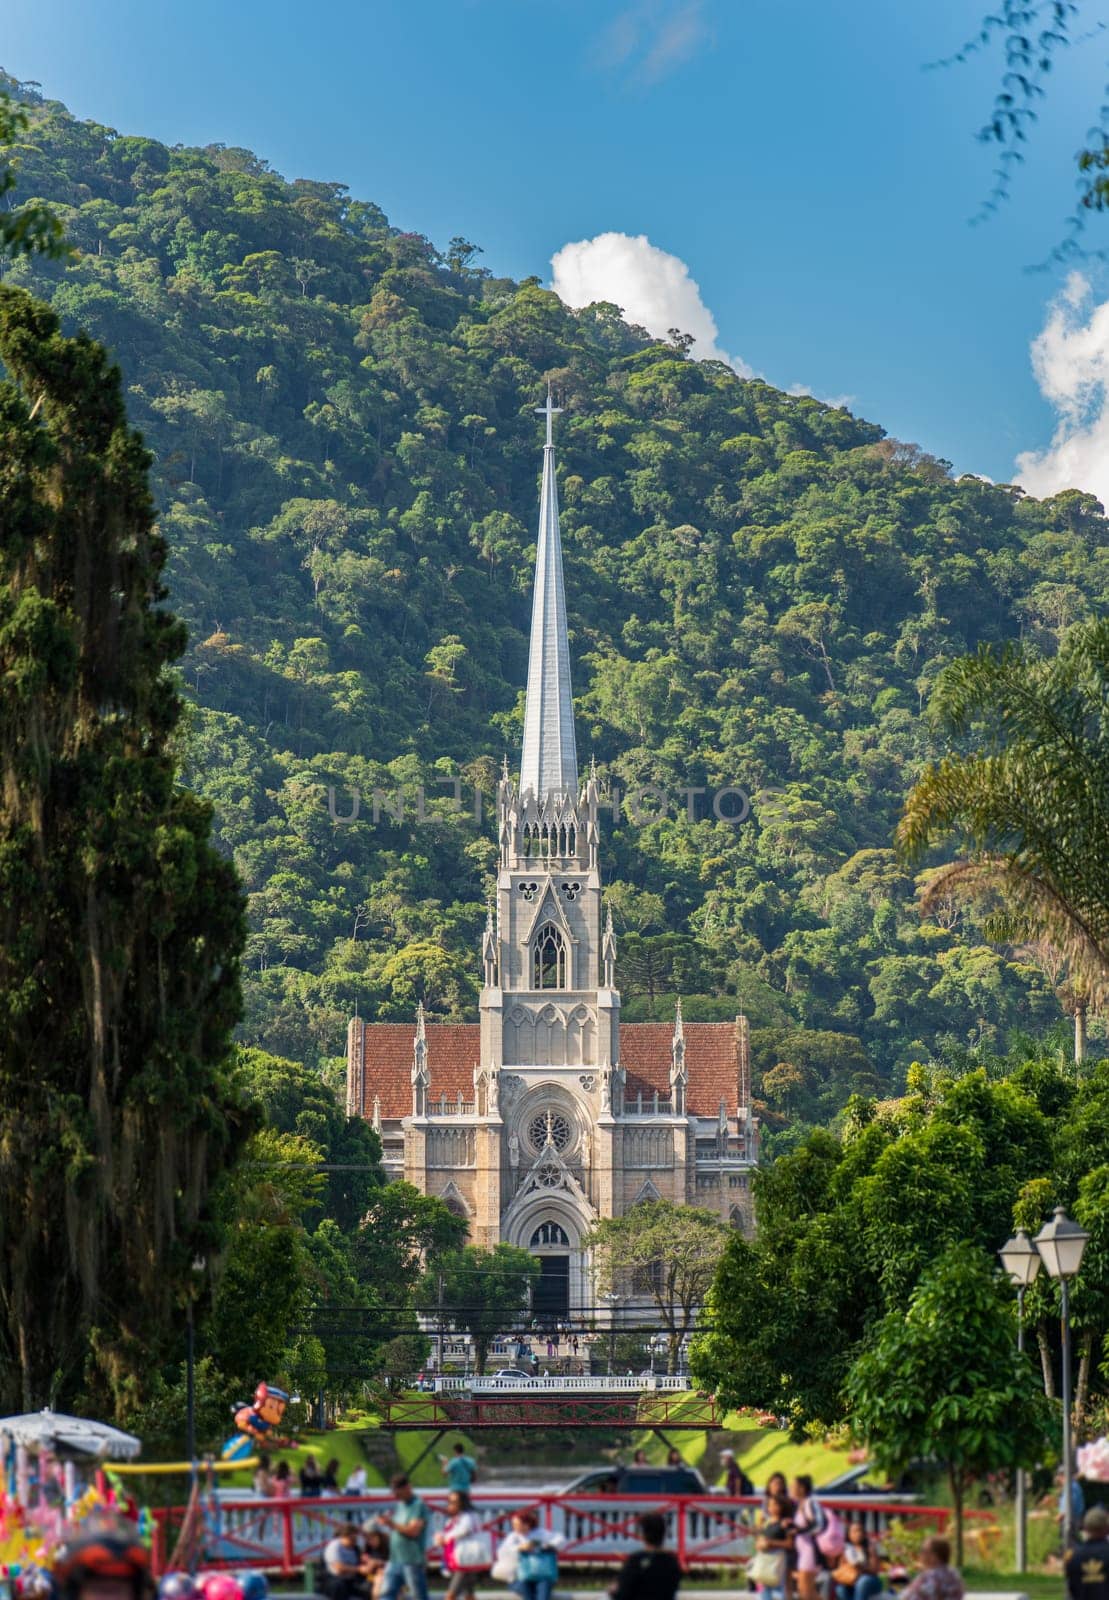 Impressive view of the towering Petropolis Cathedral in the distance, with a dense jungle mountain range as a stunning backdrop. People are walking around, but their figures are blurred, giving an ethereal quality to the scene.